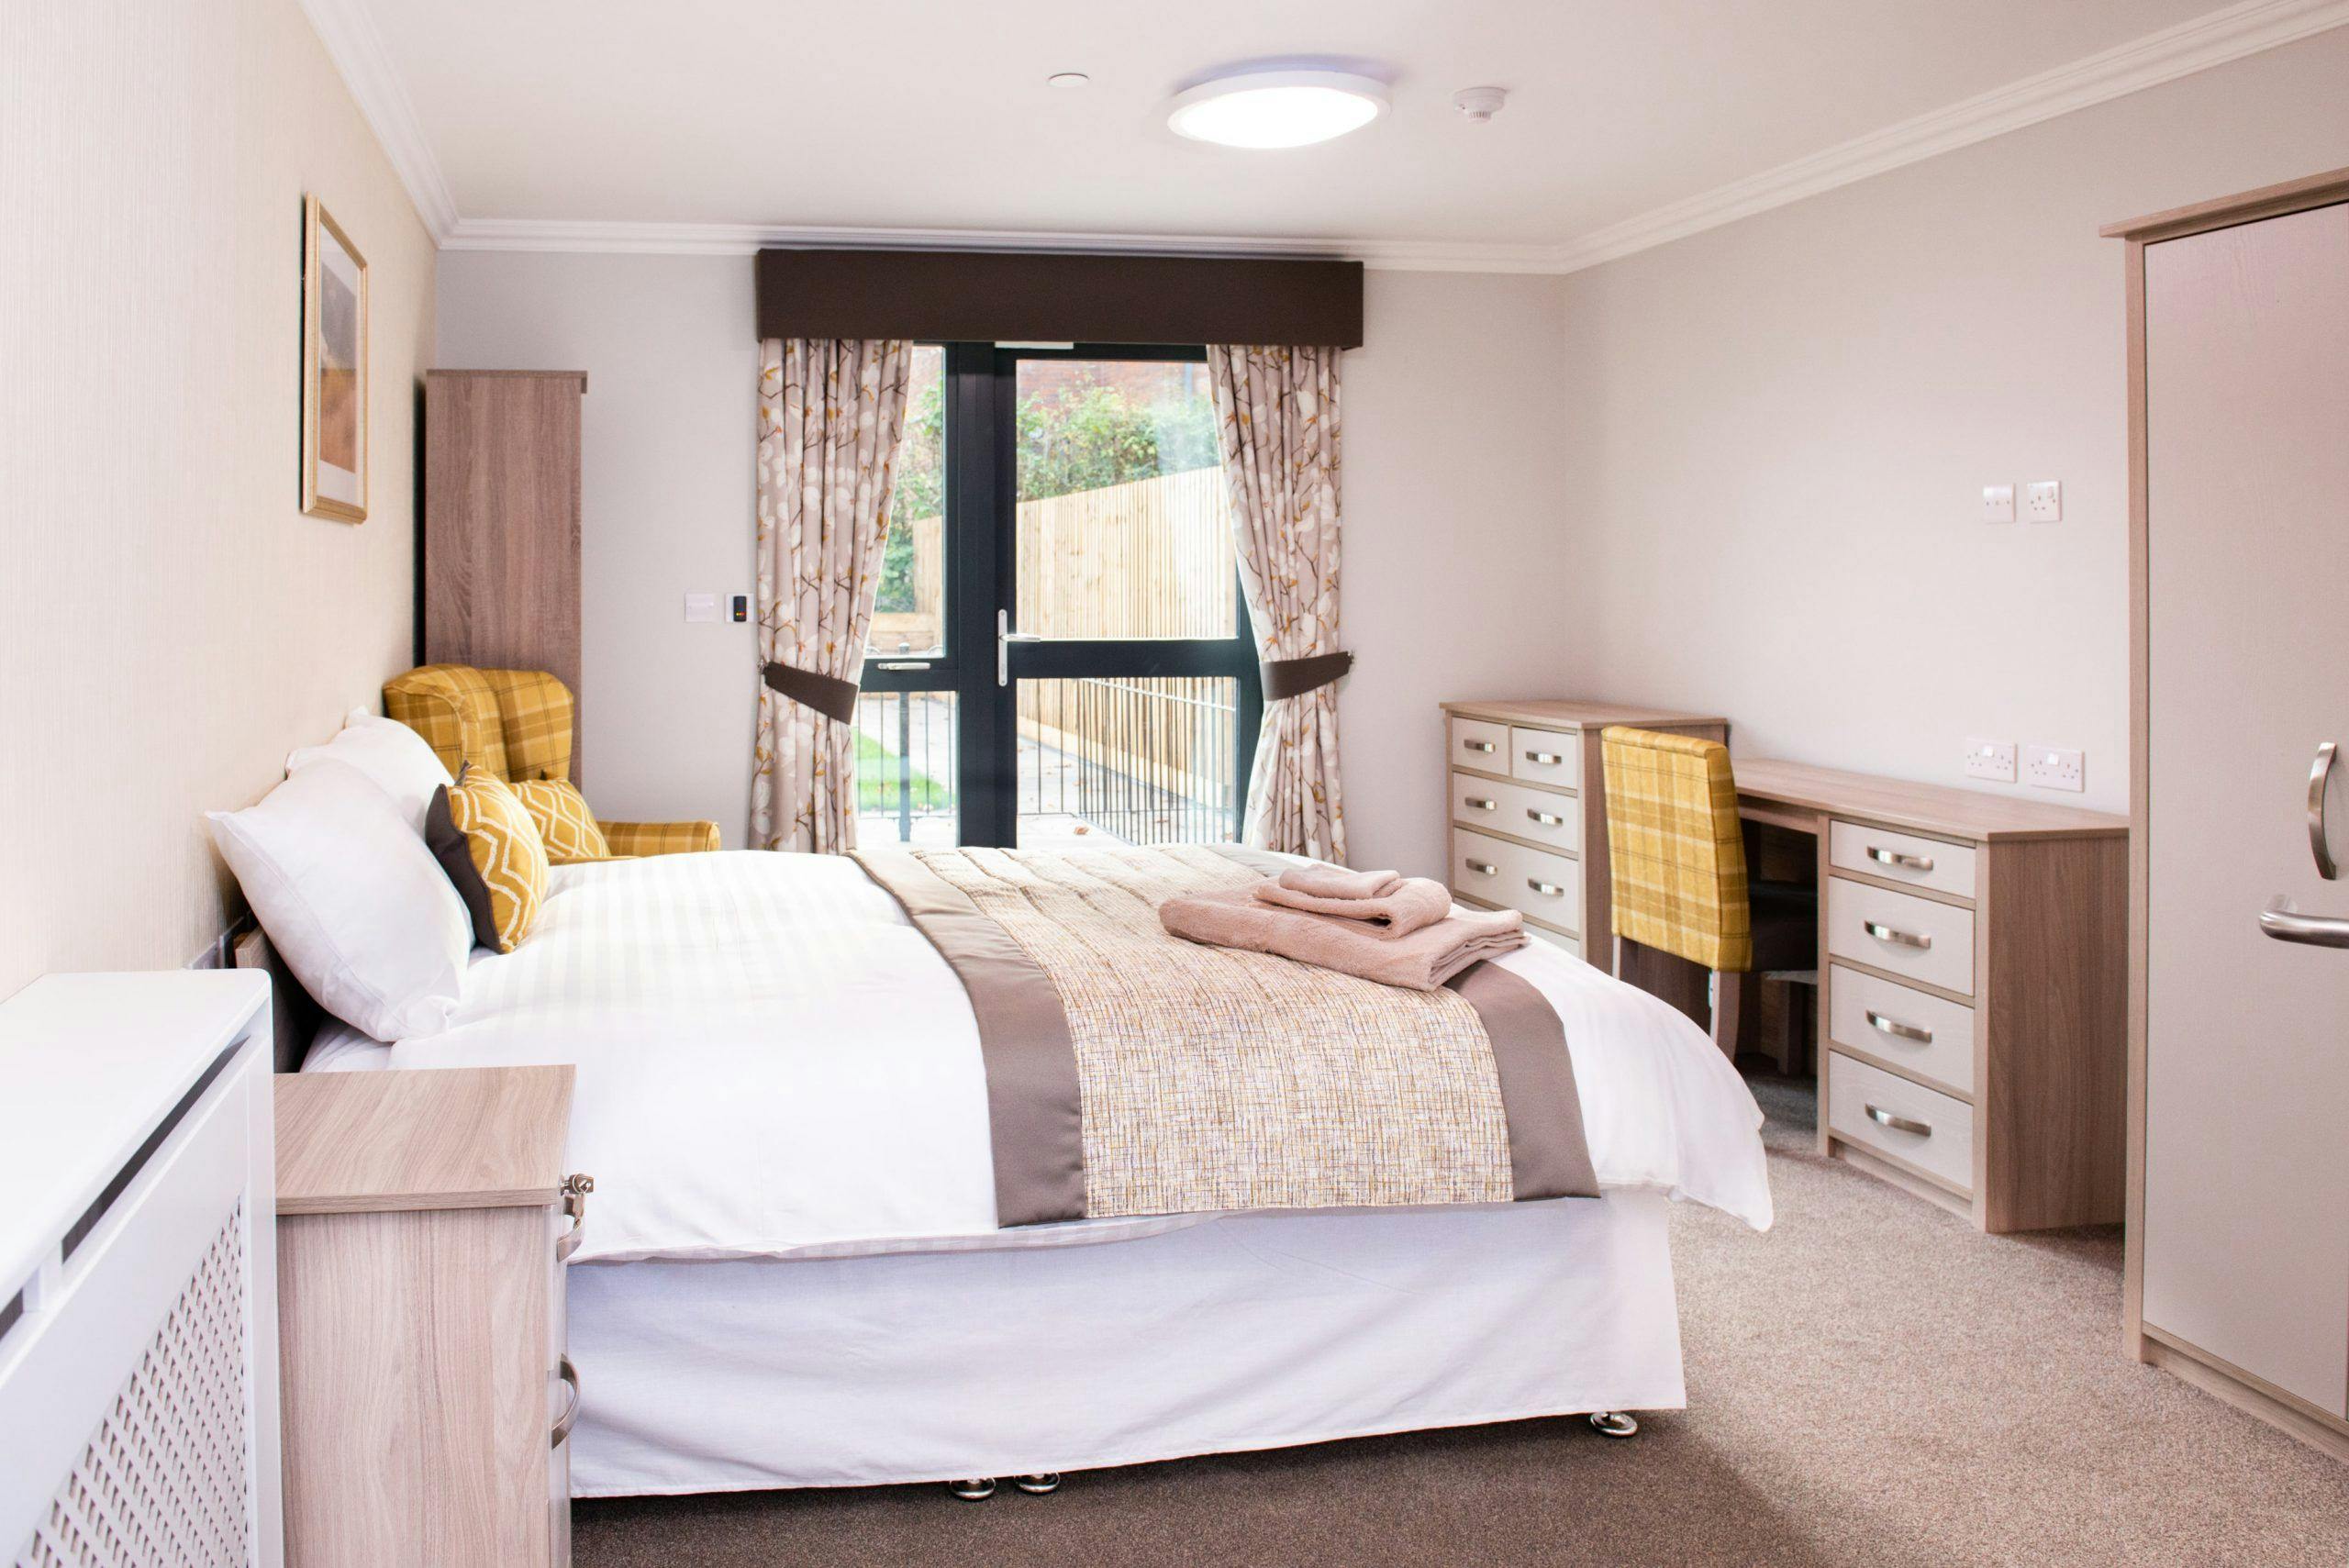 Bedroom of Heanor Park Care Home in Ripley, Derbyshire